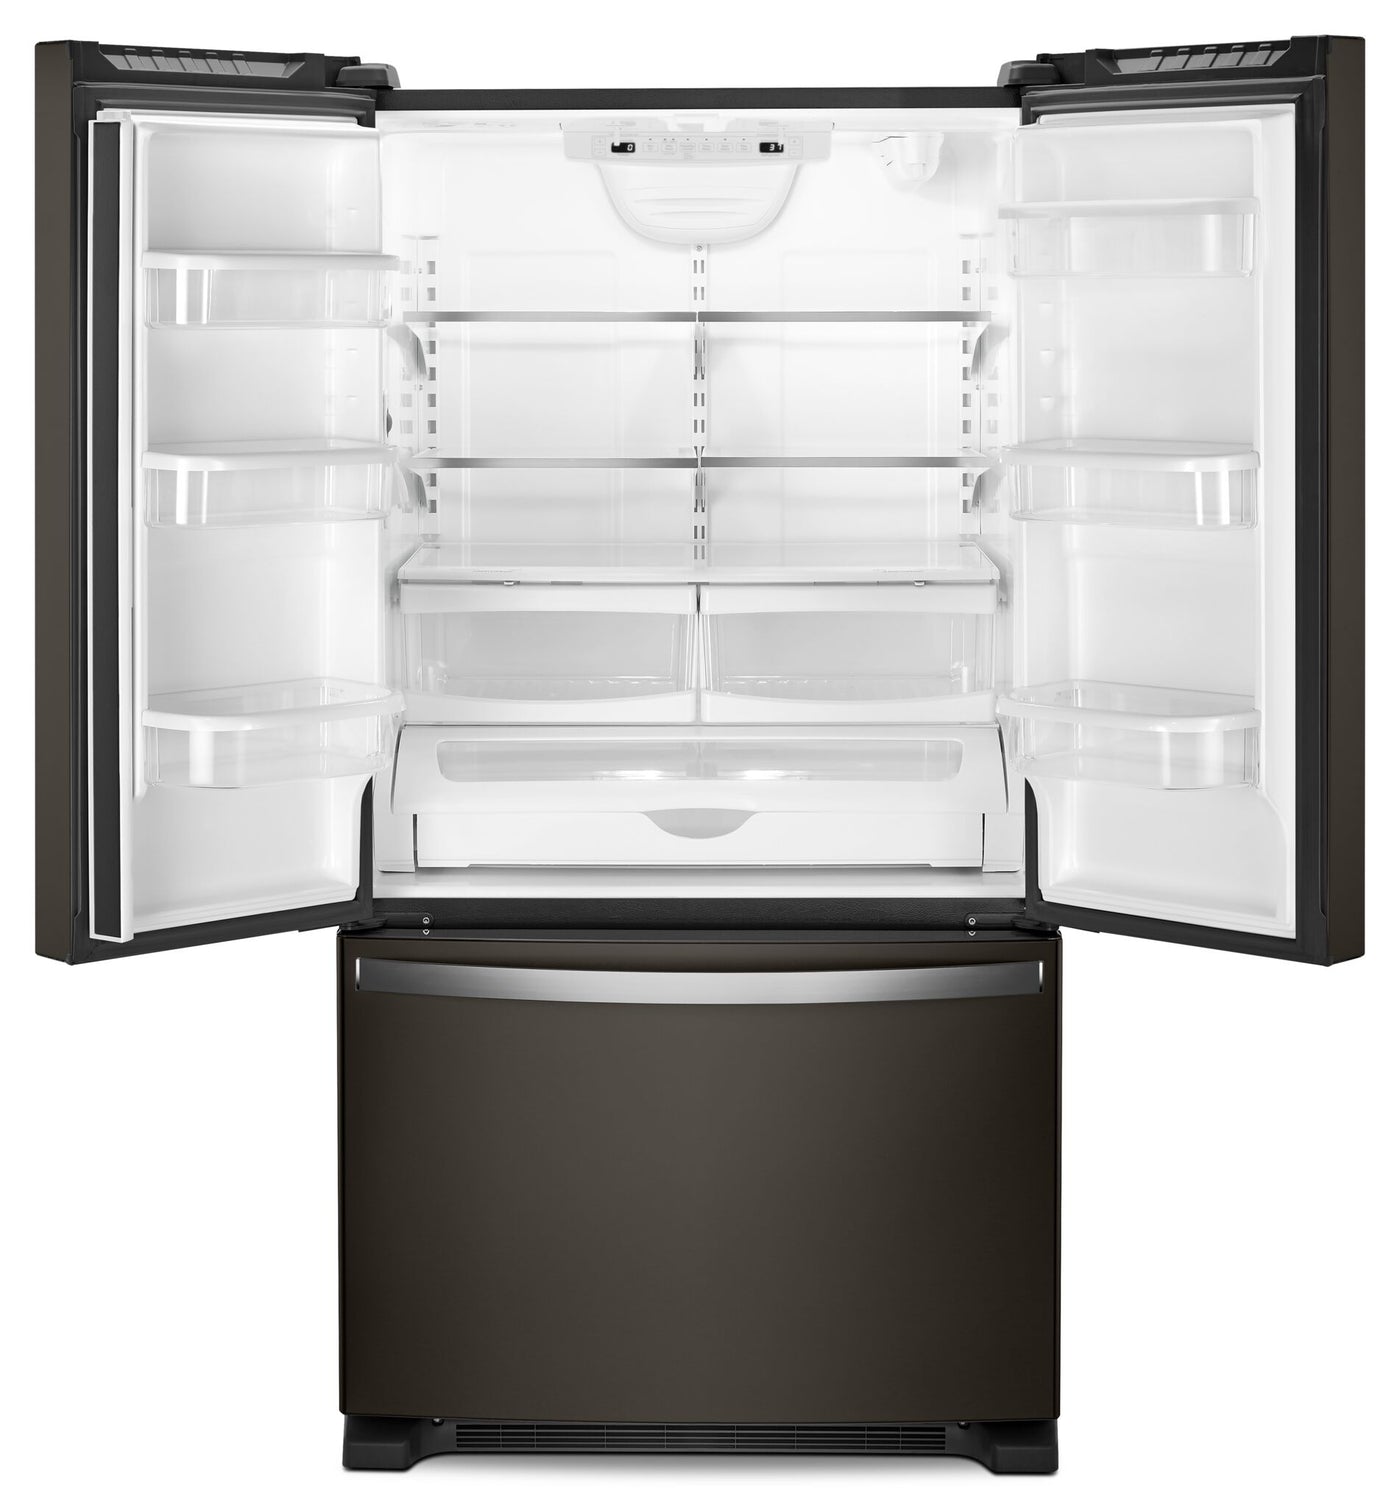 Whirlpool Black Stainless Steel French Door Refrigerator (22.1 Cu Ft) - WRFF5333PV